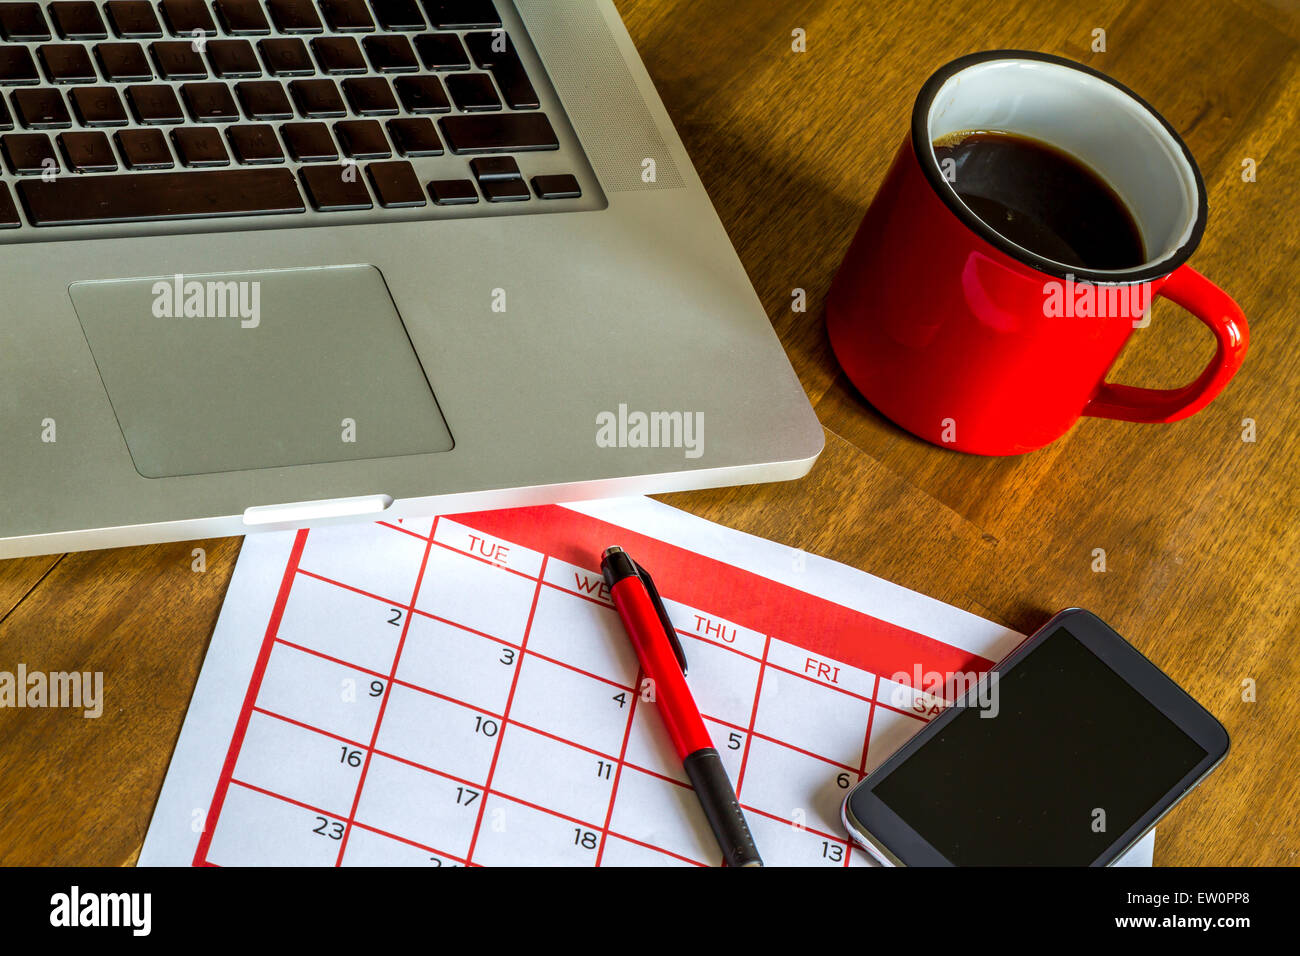 Working with the laptop and organizing monthly activities and appointments in the calendar Stock Photo